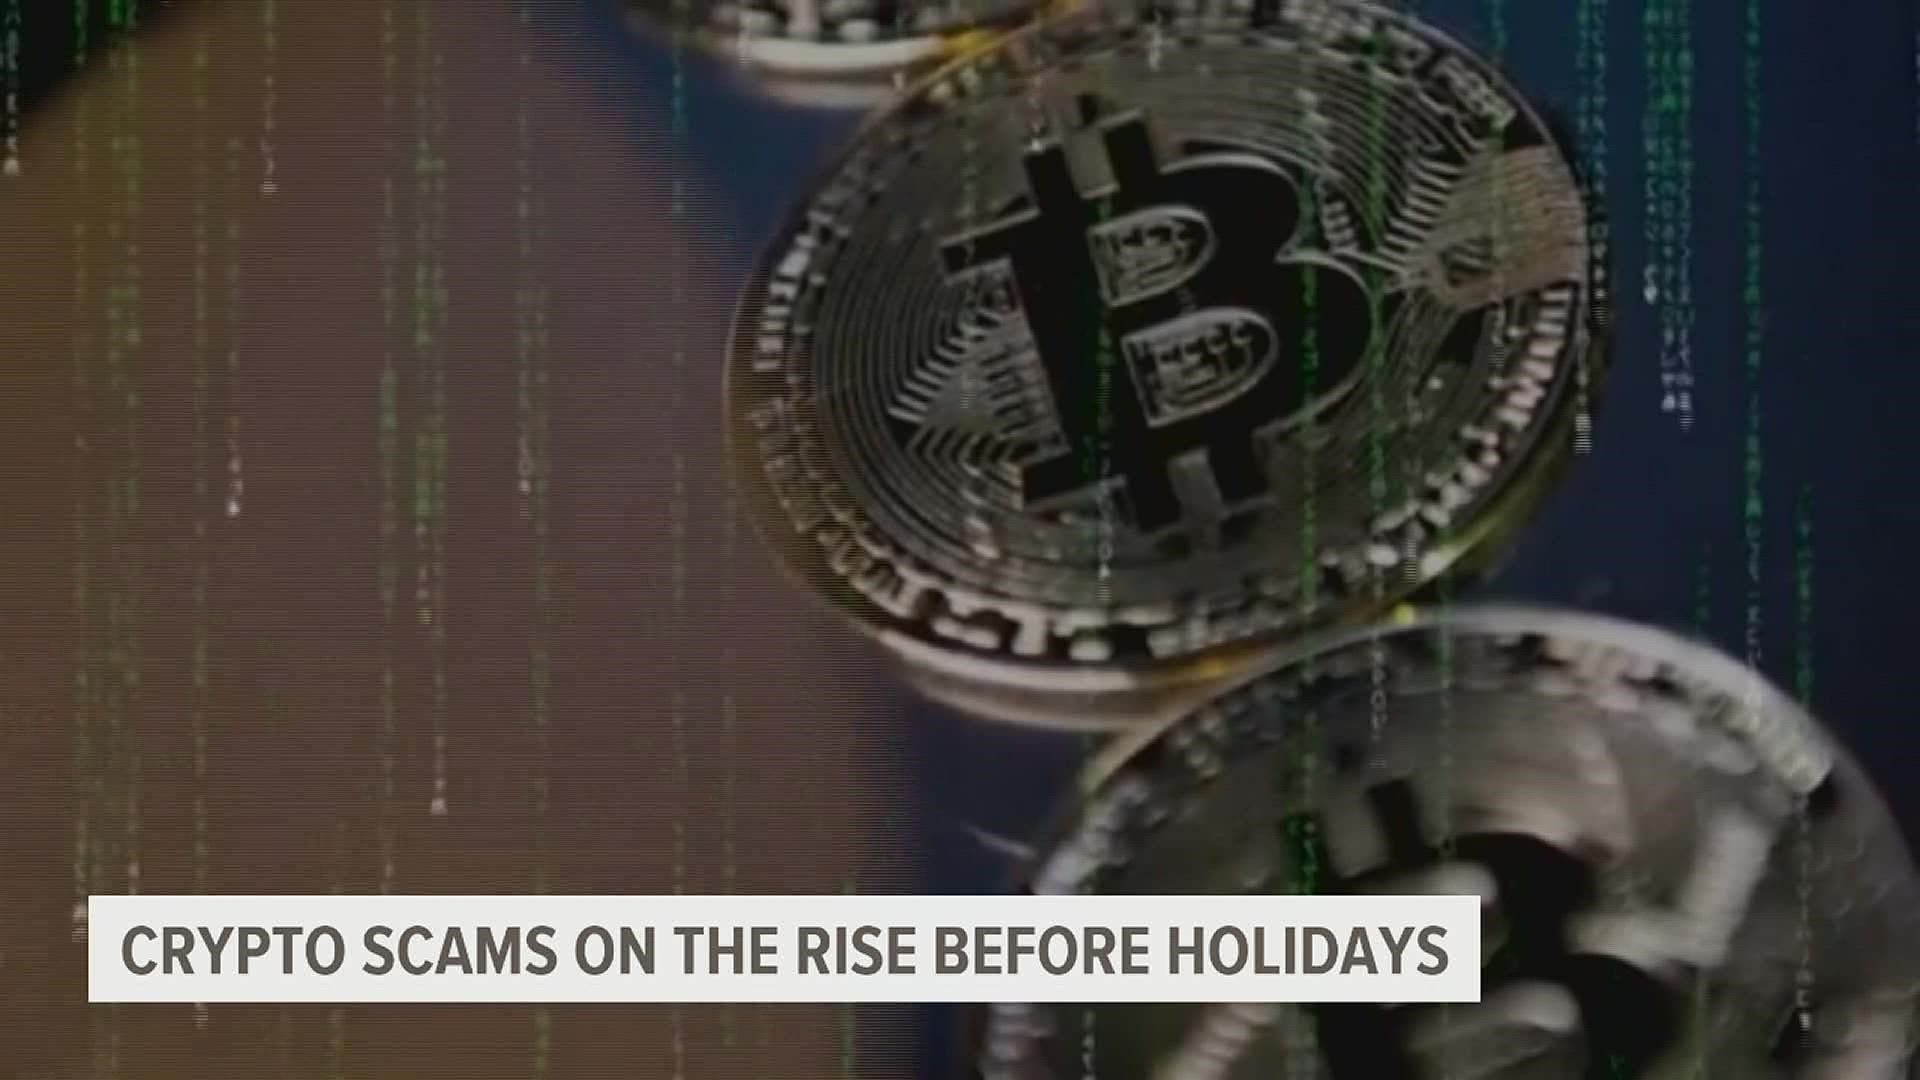 As online shopping for the holiday ramps up, cyber experts are sounding the alarm about the rising number of crypto scams